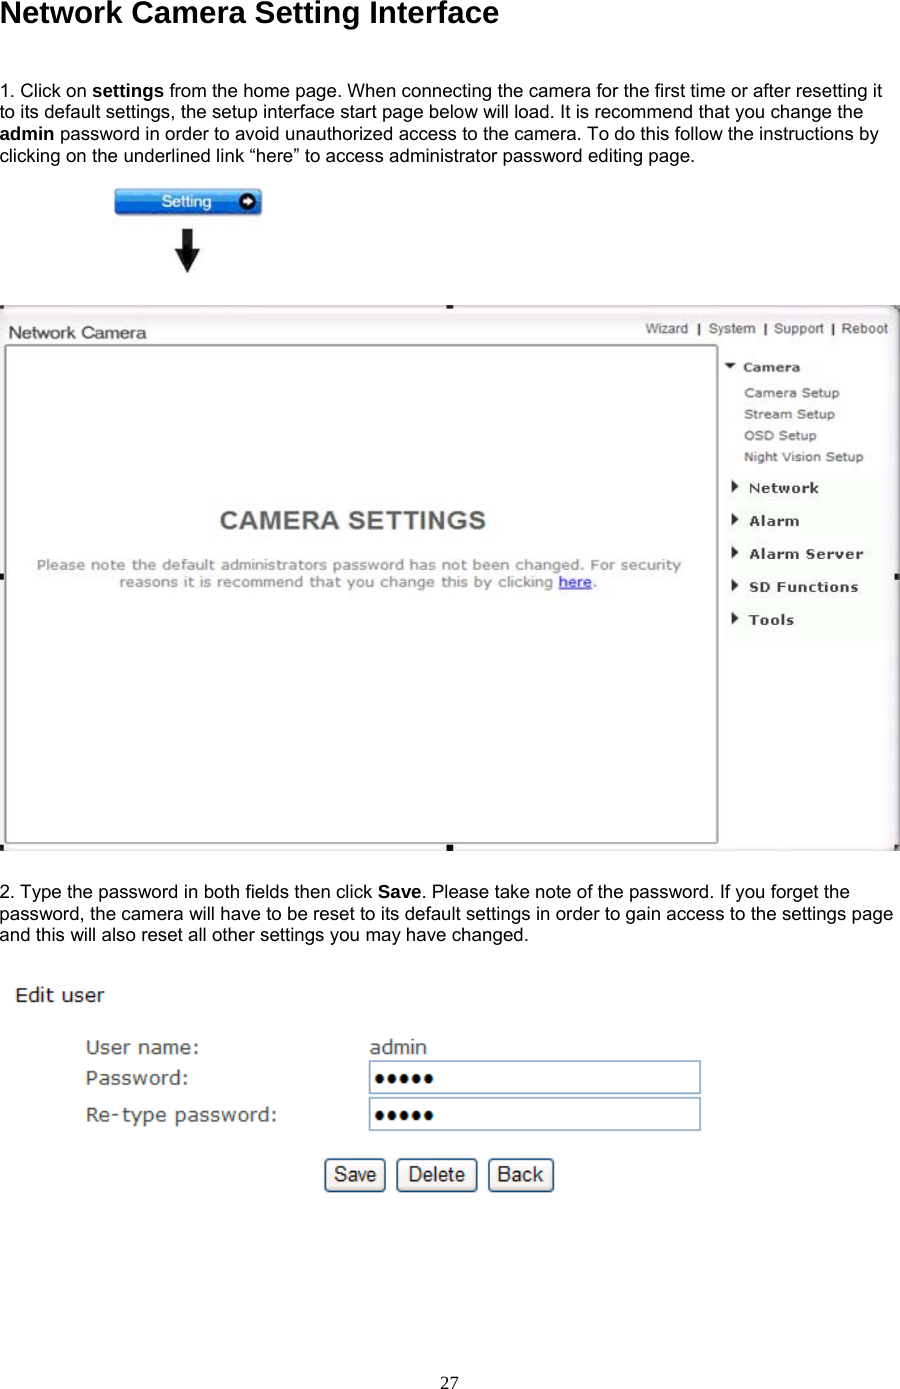 Network Camera Setting Interface    1. Click on settings from the home page. When connecting the camera for the first time or after resetting it to its default settings, the setup interface start page below will load. It is recommend that you change the admin password in order to avoid unauthorized access to the camera. To do this follow the instructions by clicking on the underlined link “here” to access administrator password editing page.    2. Type the password in both fields then click Save. Please take note of the password. If you forget the password, the camera will have to be reset to its default settings in order to gain access to the settings page and this will also reset all other settings you may have changed.         27